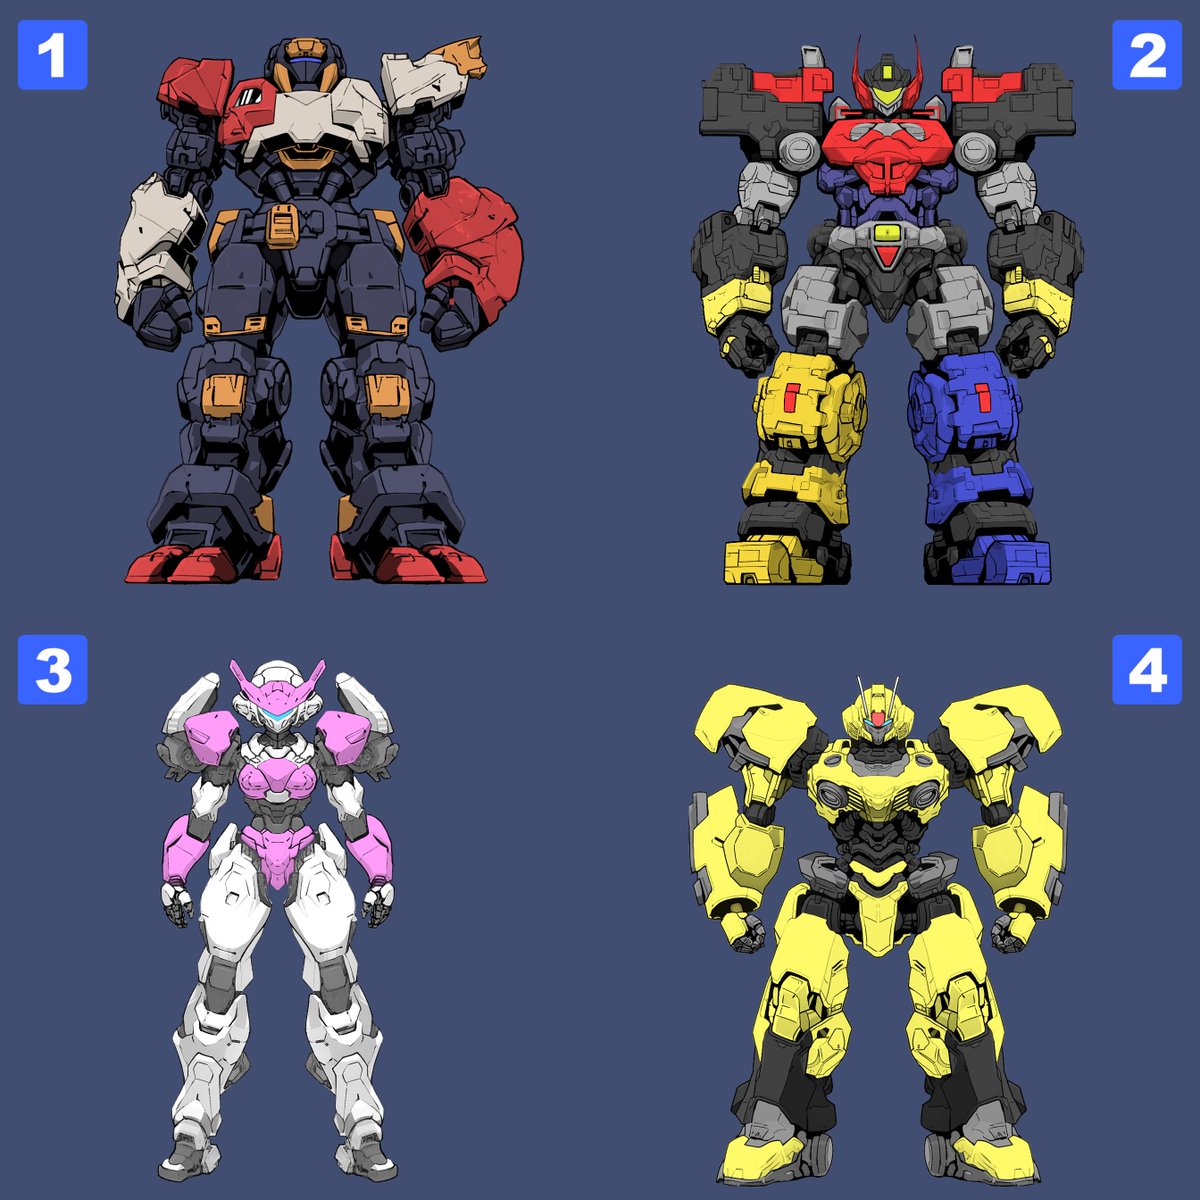 🙋Question for the next demo: Which one do you like the most 1 2 3 or 4??

😉Don't worry all those models will be available on the final release. But the winner will be implemented on the next update.

#trailertuesday #gunpla #gundam #indiegame #mecha #gamedev #indiedev #mech